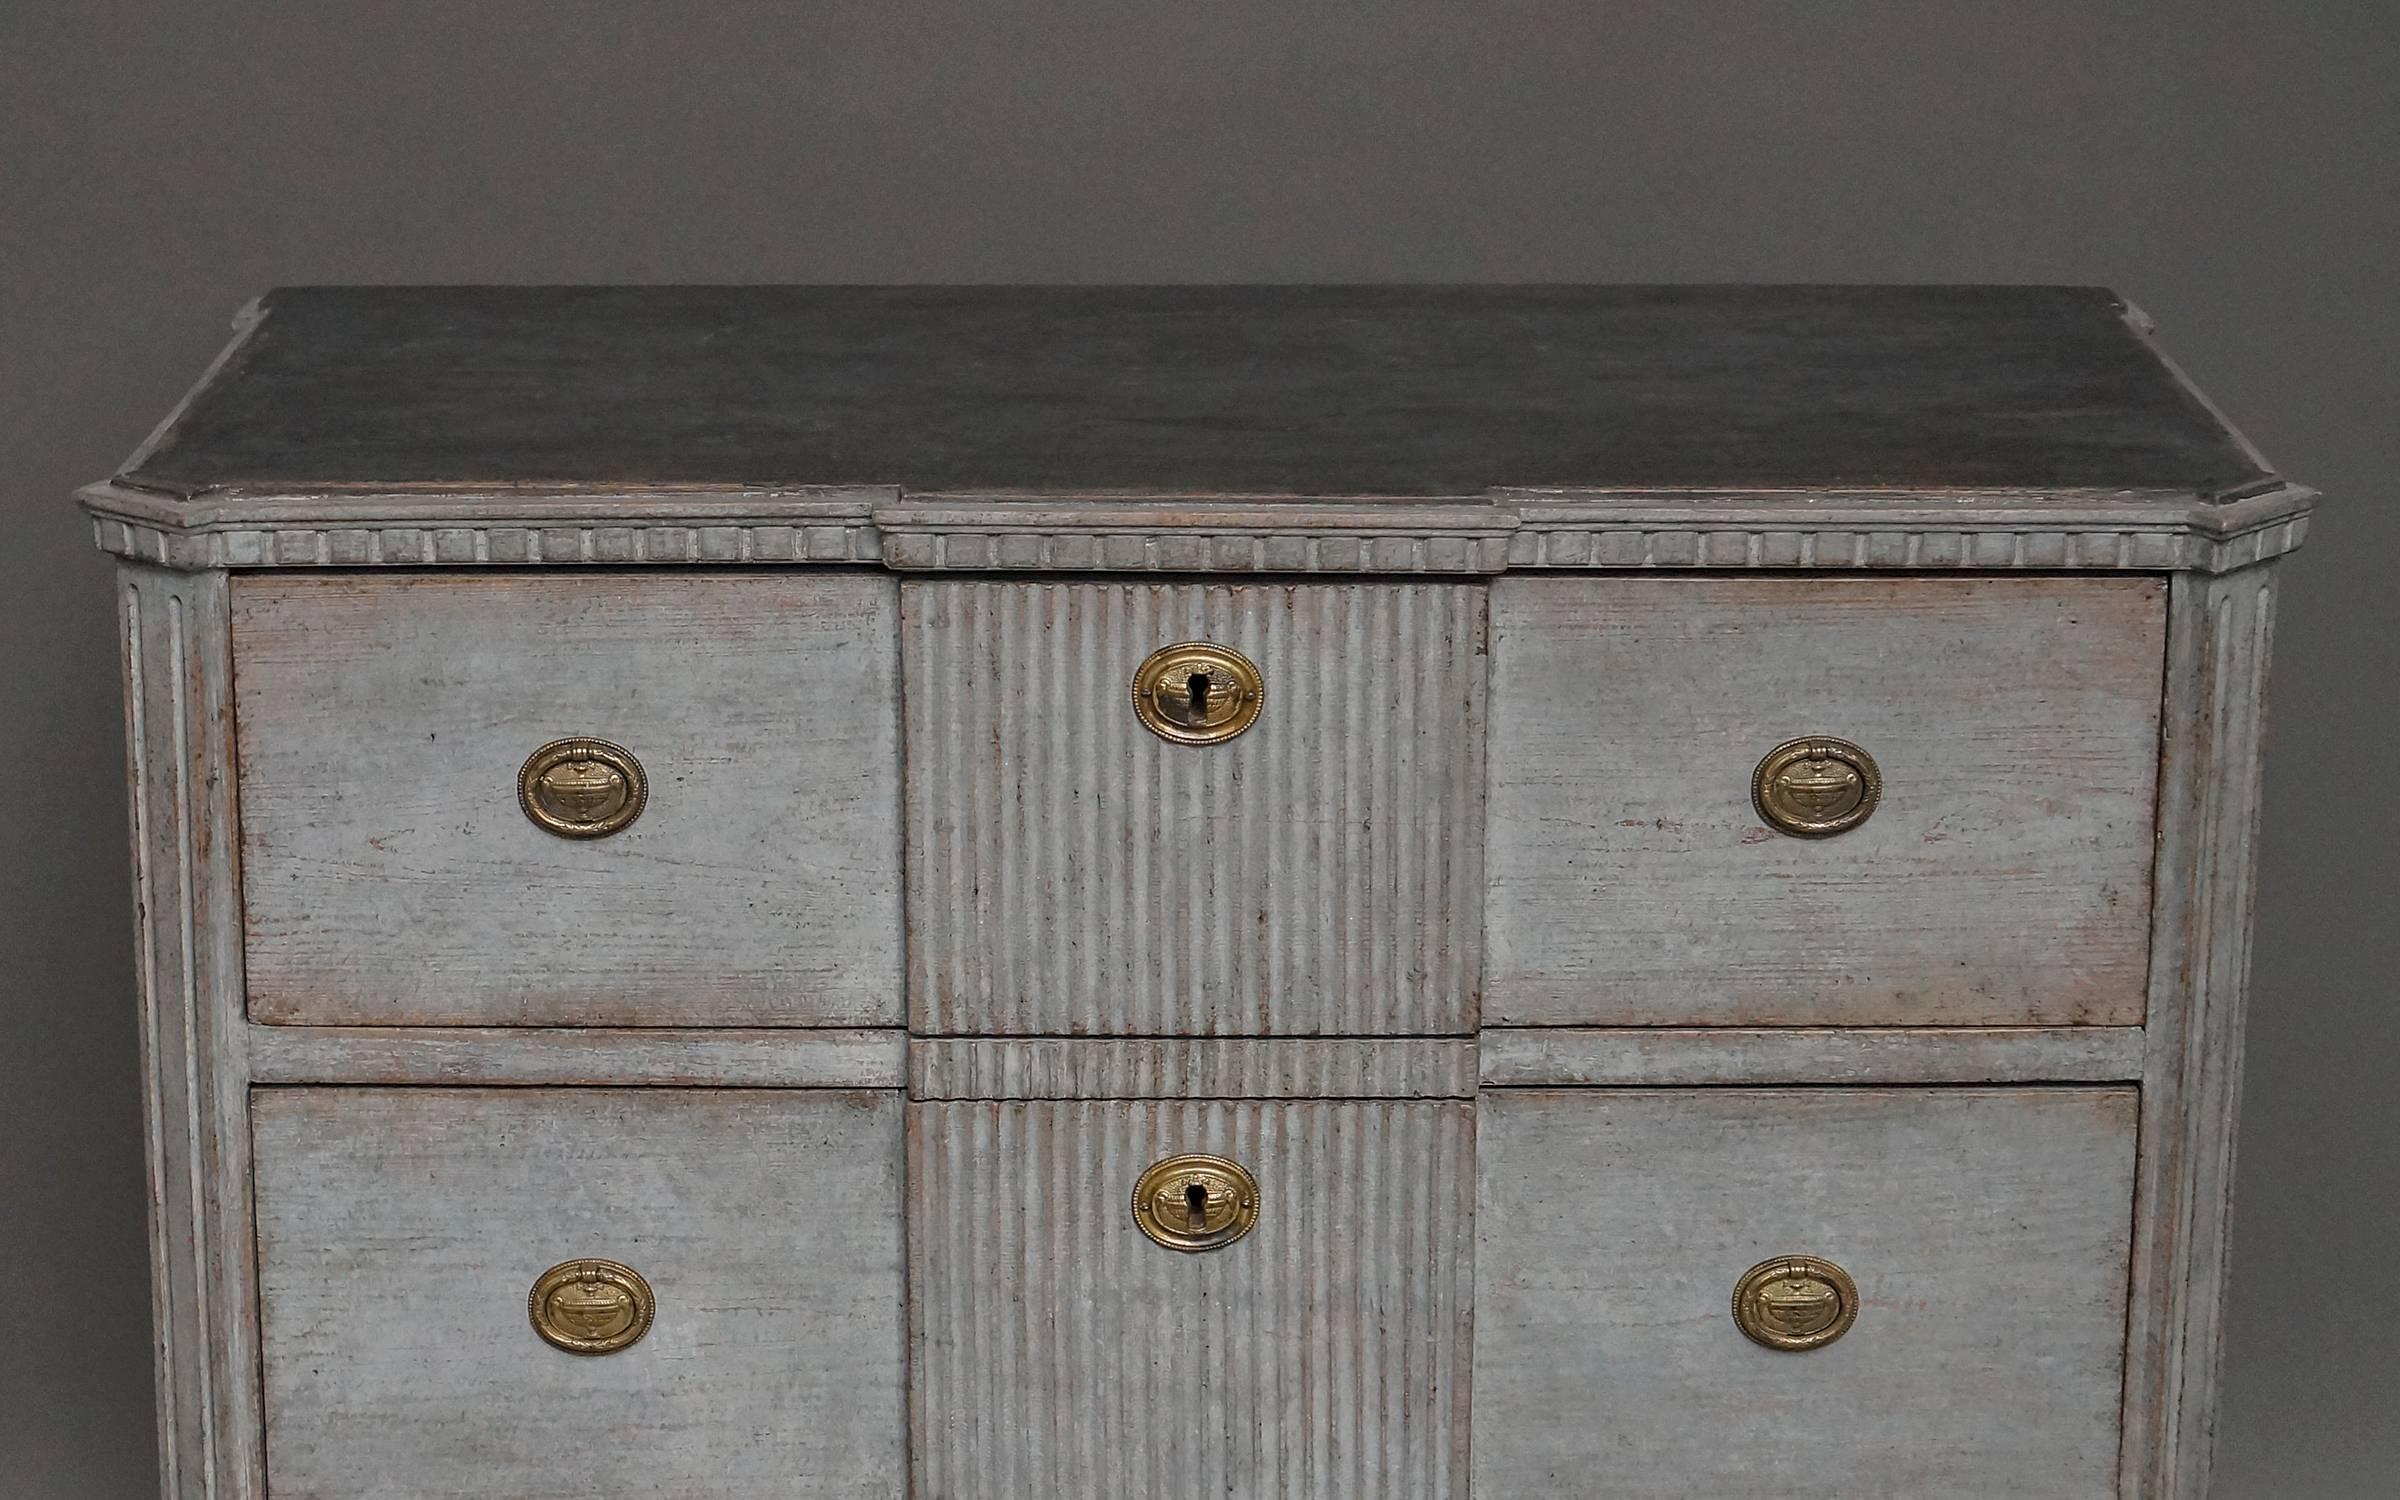 Swedish chest of drawers, circa 1870, in the Gustavian style and having three drawers with reeded panels, canted corners and dentil molding under the shaped top. The worn gray paint has a beautiful patina and contrasts well with the darker painted